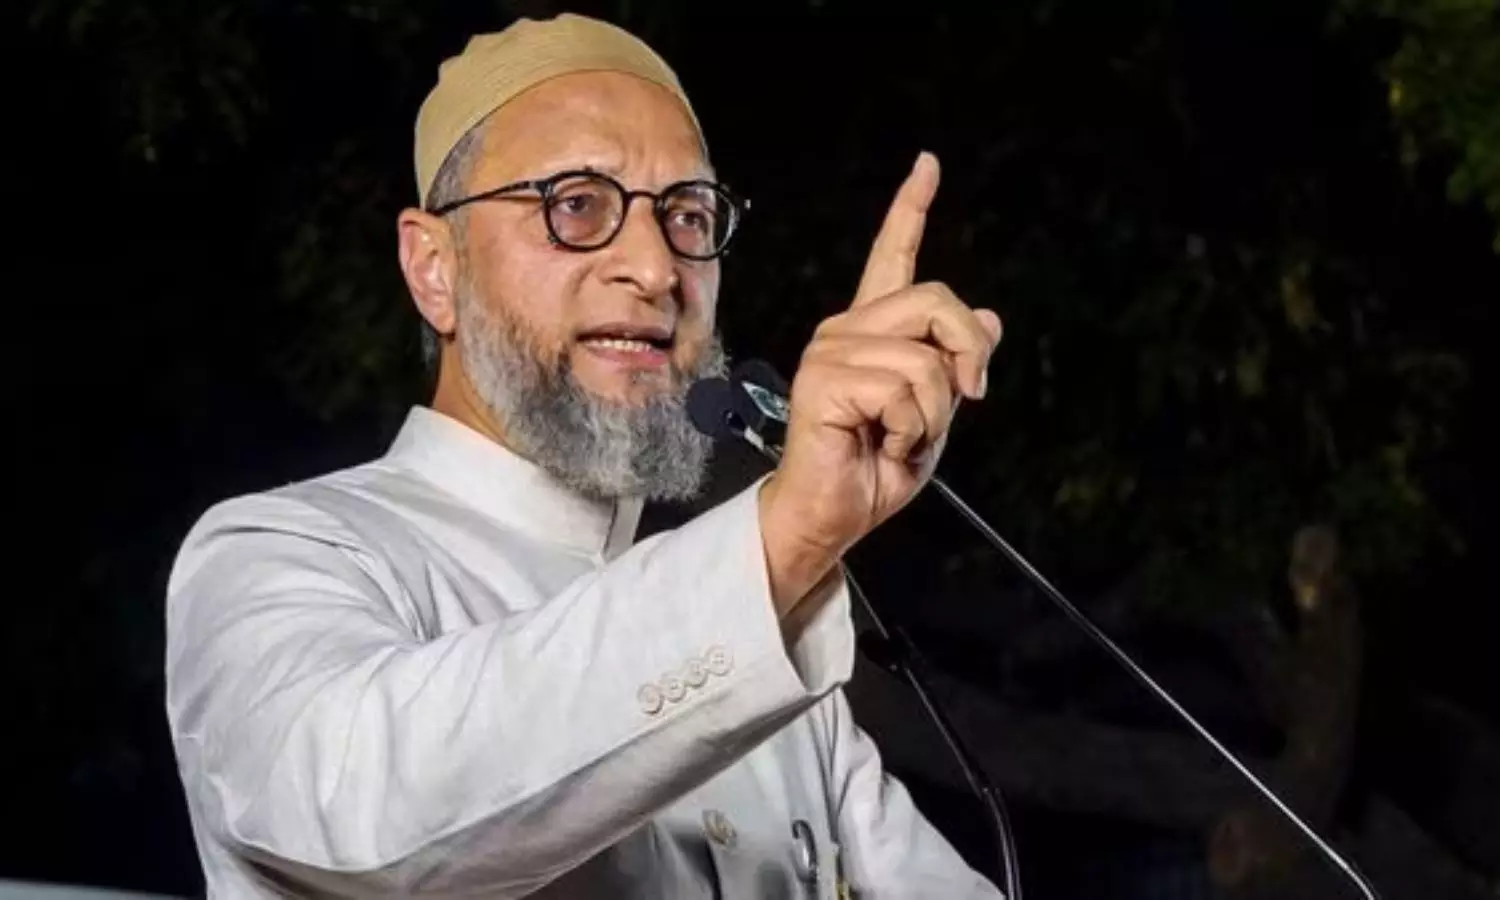 Asaduddin Owaisi Compares Muslims in India to Jews During Hitlers Era